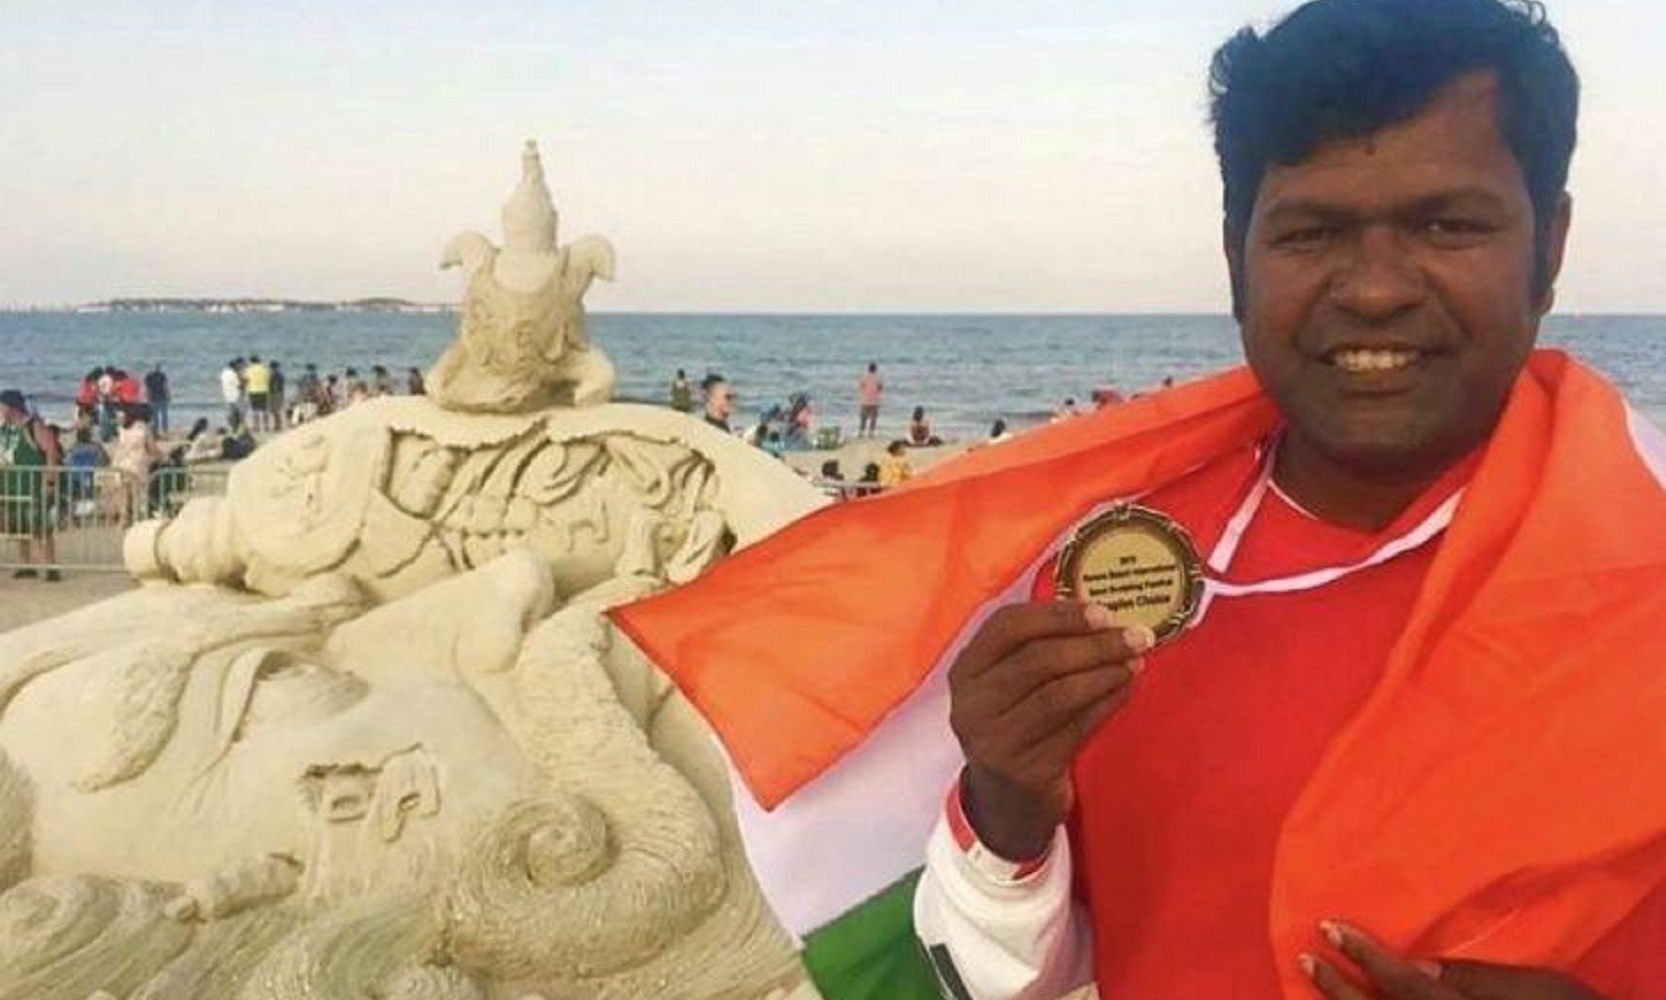 This Indian Sand Artist Just Won People’s Choice Award for his Work, in the US